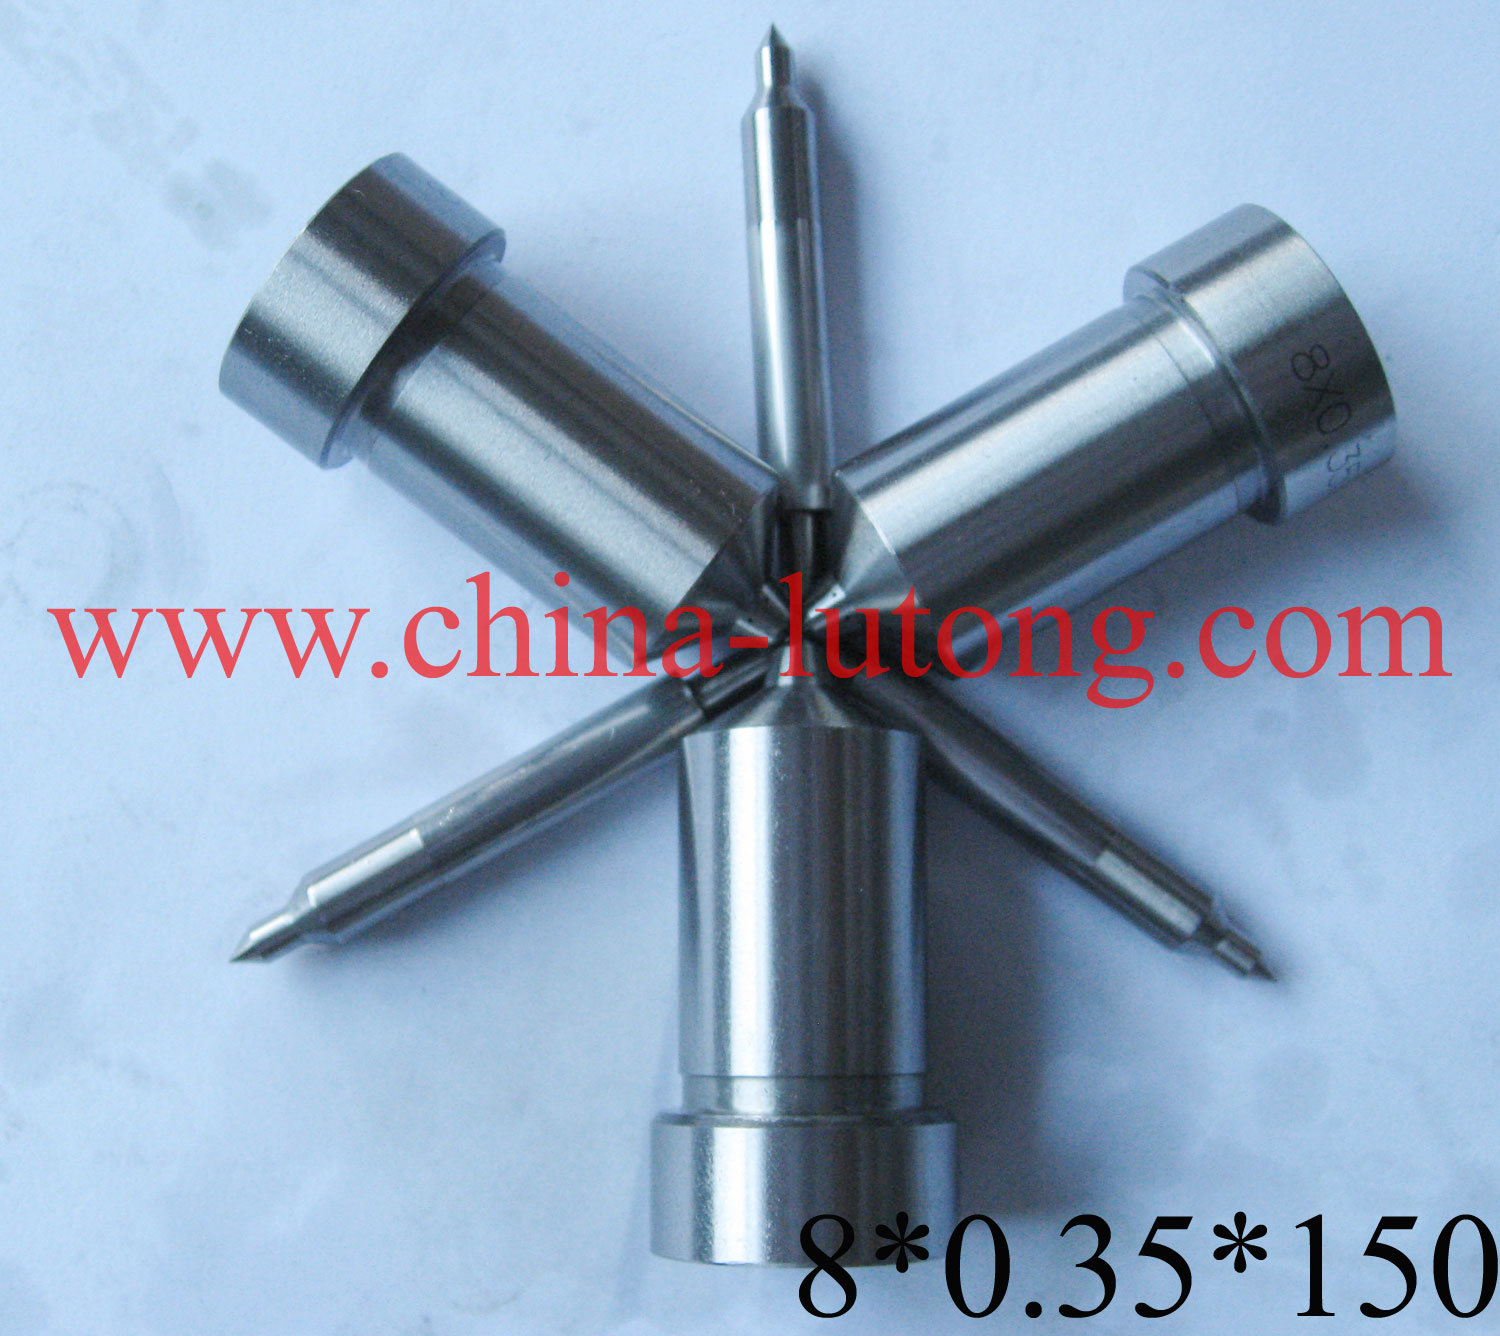 Fuel Injector Nozzle 8 *0.35 *150 for Marine Engines